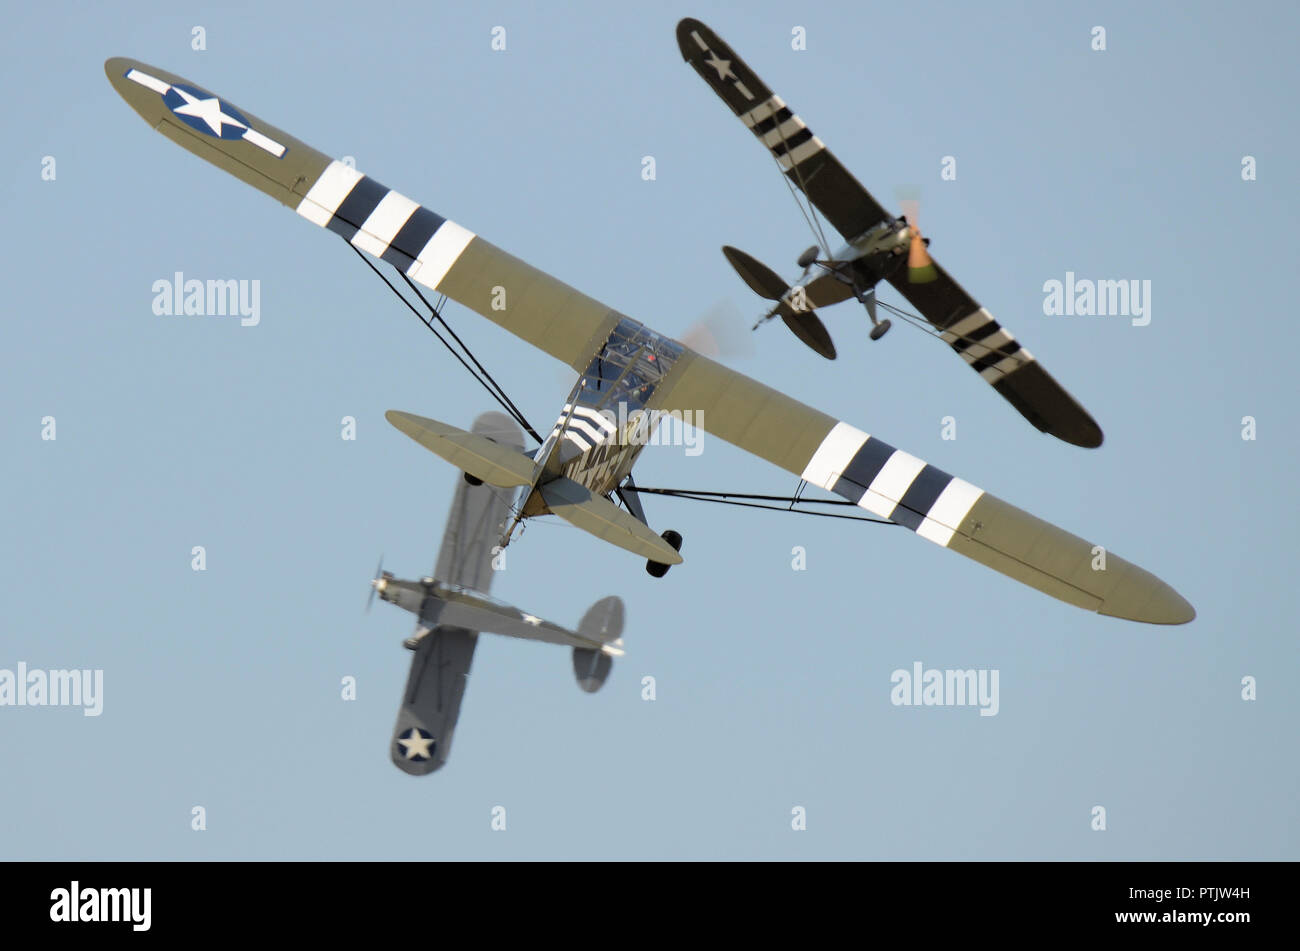 Trio of L4 Cub planes flying at an airshow. Piper L-4 Grasshopper military version of Piper J-3 Cub. D-Day invasion stripes. Spotter planes breaking Stock Photo